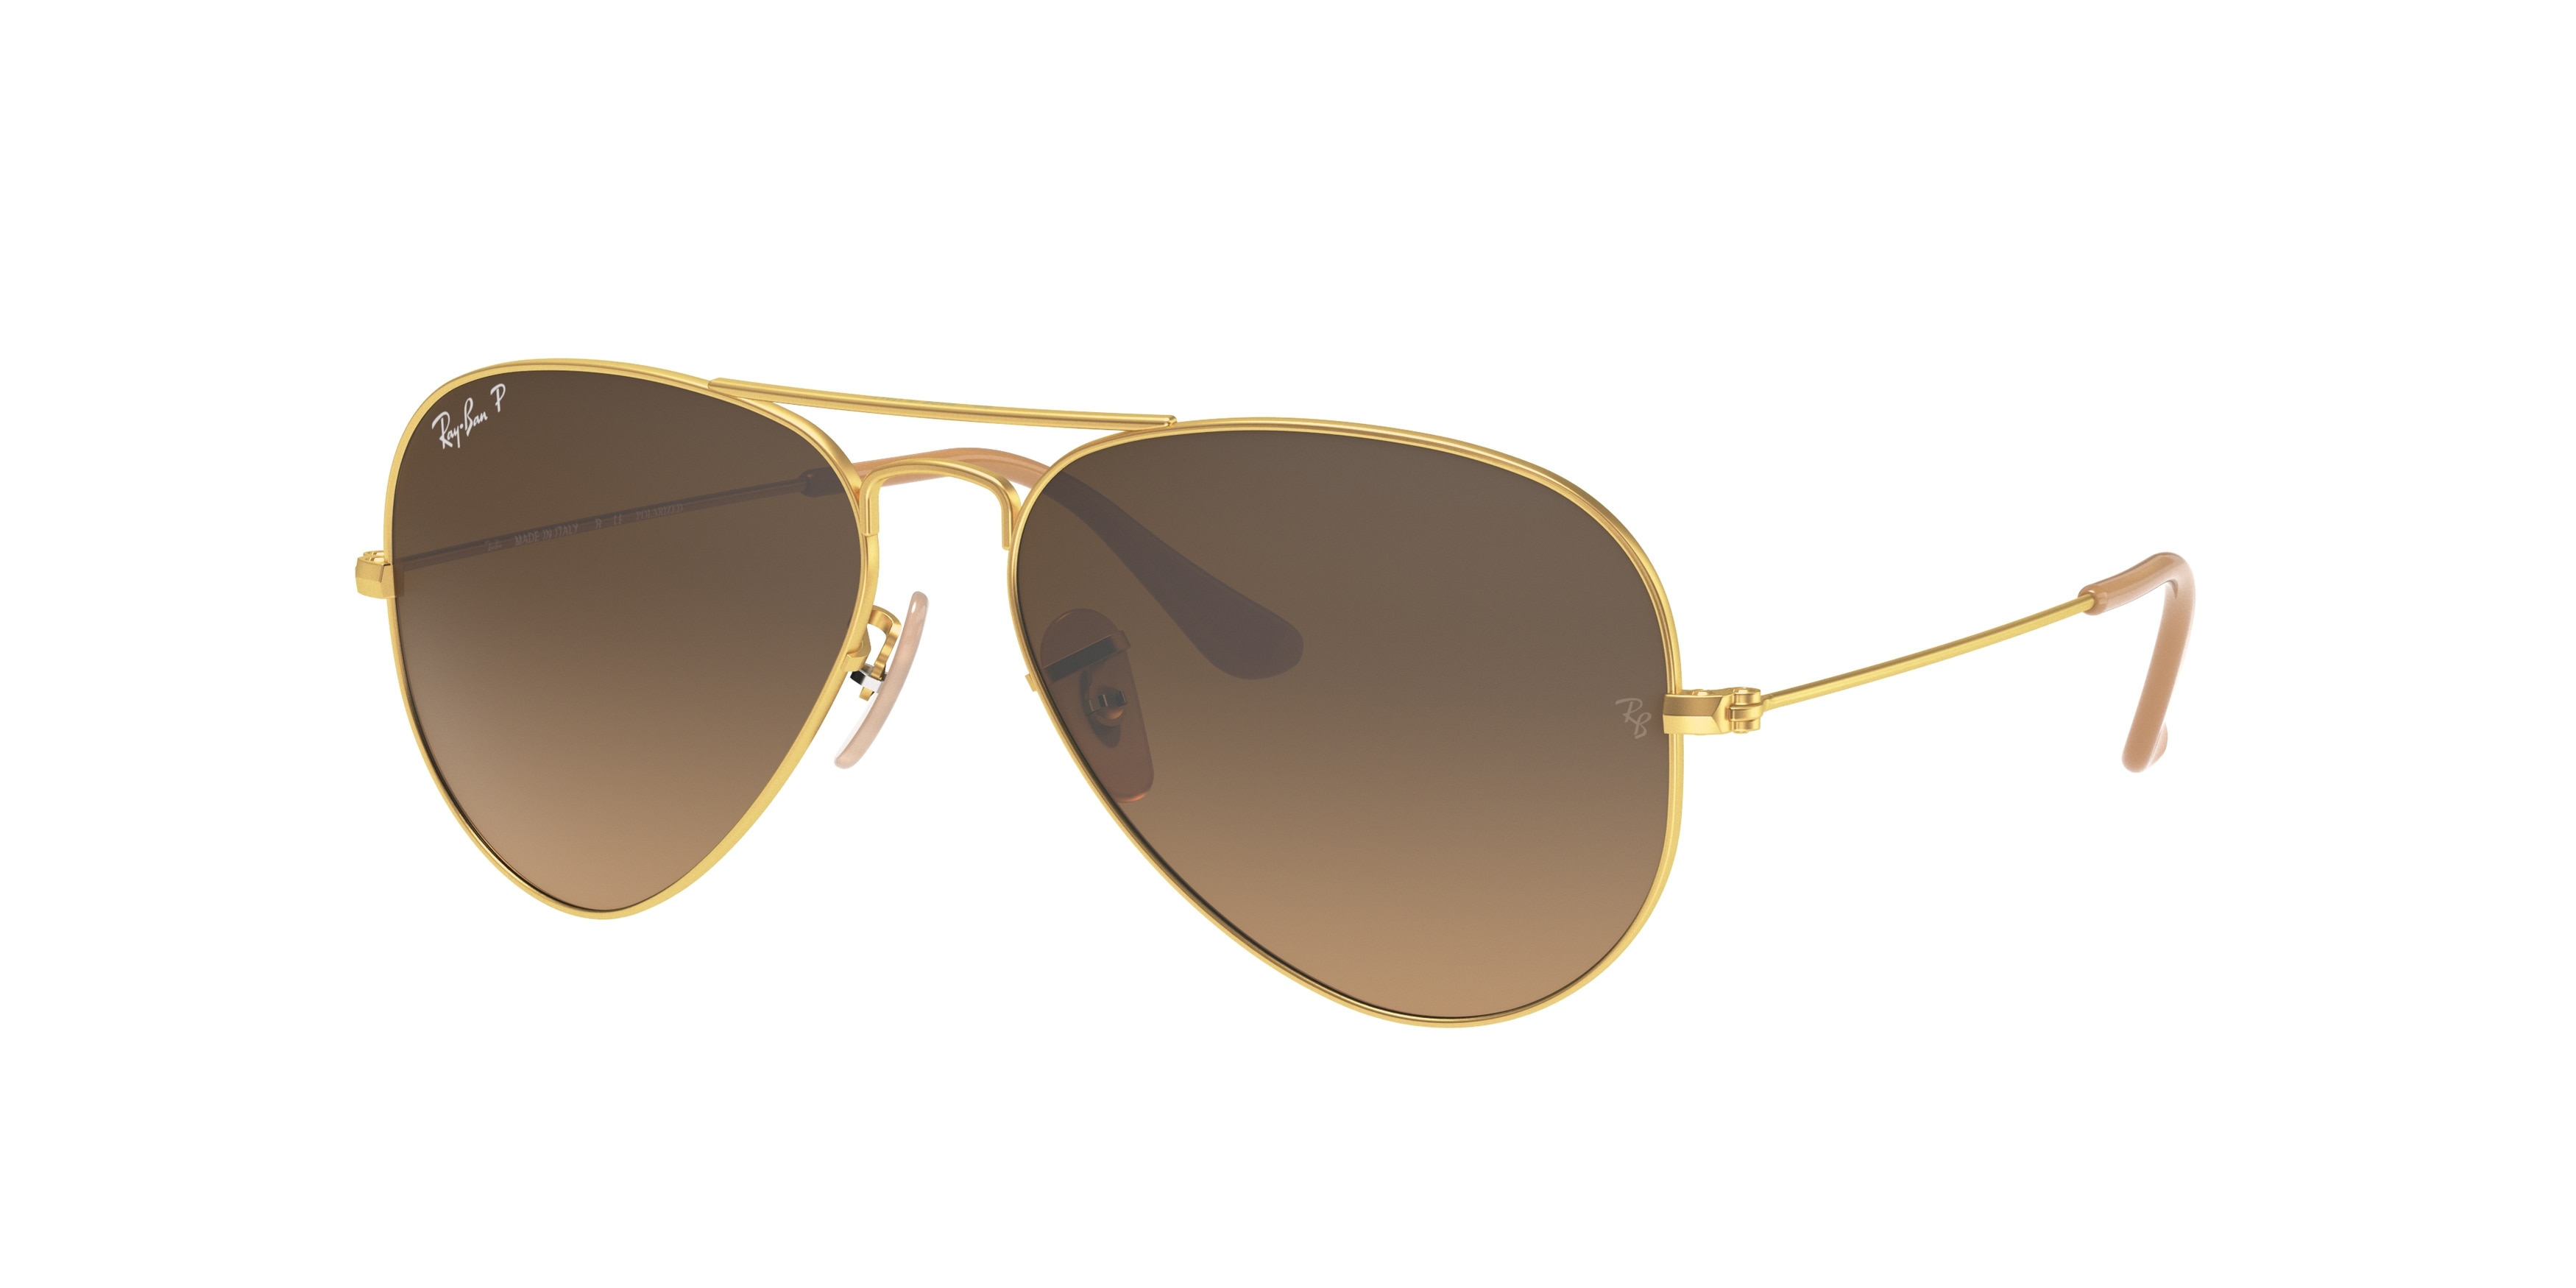 Ray-ban Aviator Large Metal RB3025 112/M2 Gold Polarized (Polarized Brown Gradient)